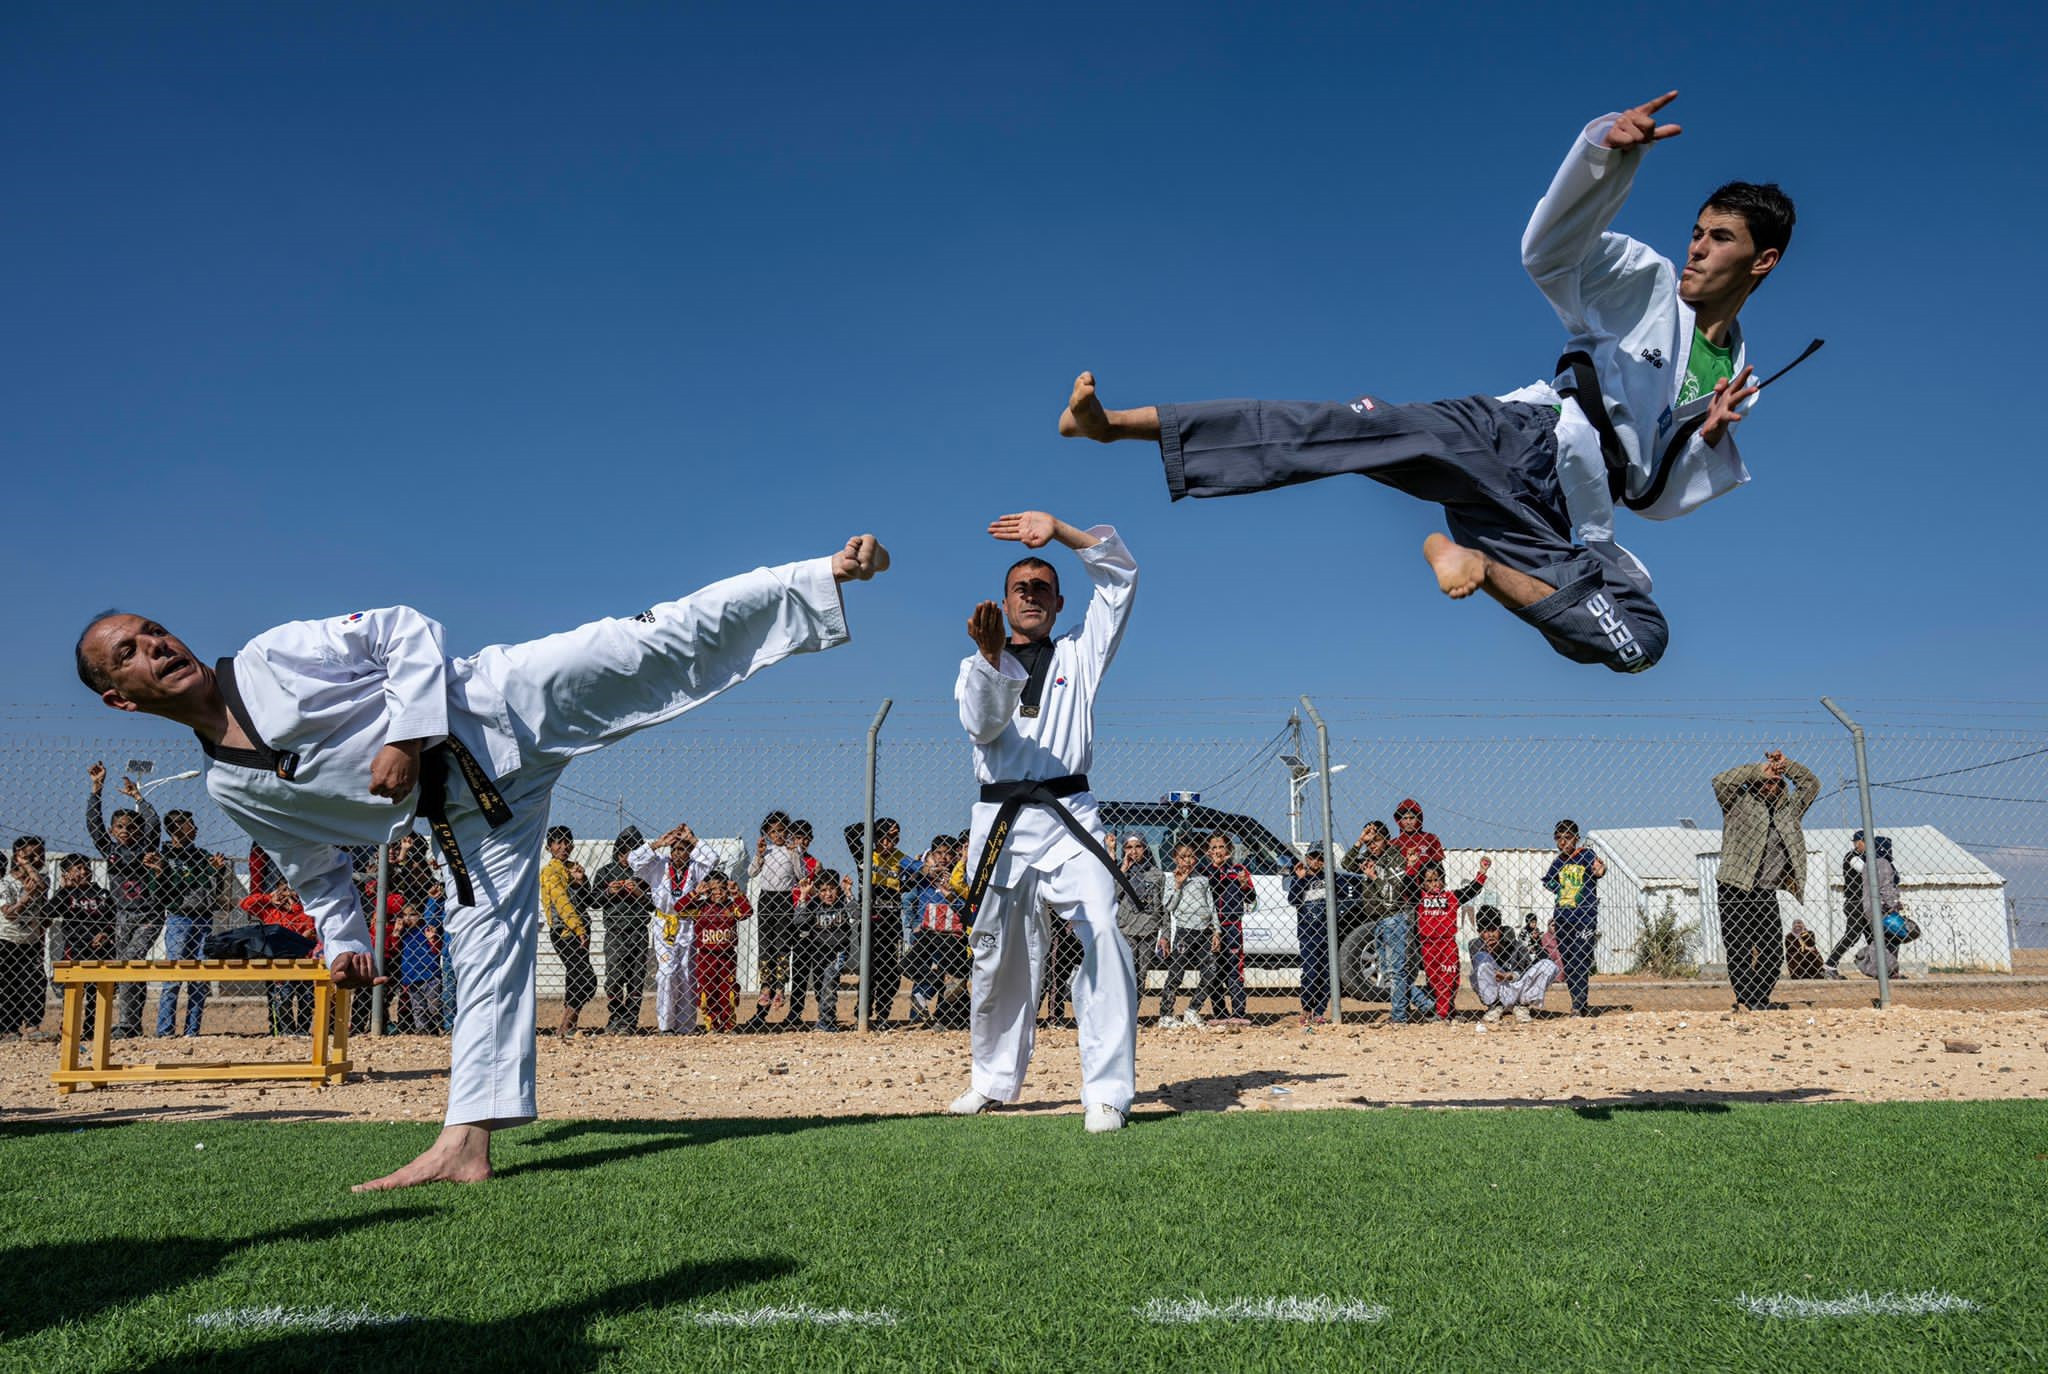 Taekwondo demonstrations were performed by refugee athletes at the Humanitarian Sports Center for visitors attending the first day of the Festival ©The Korea Times/Shim Hyun-chul